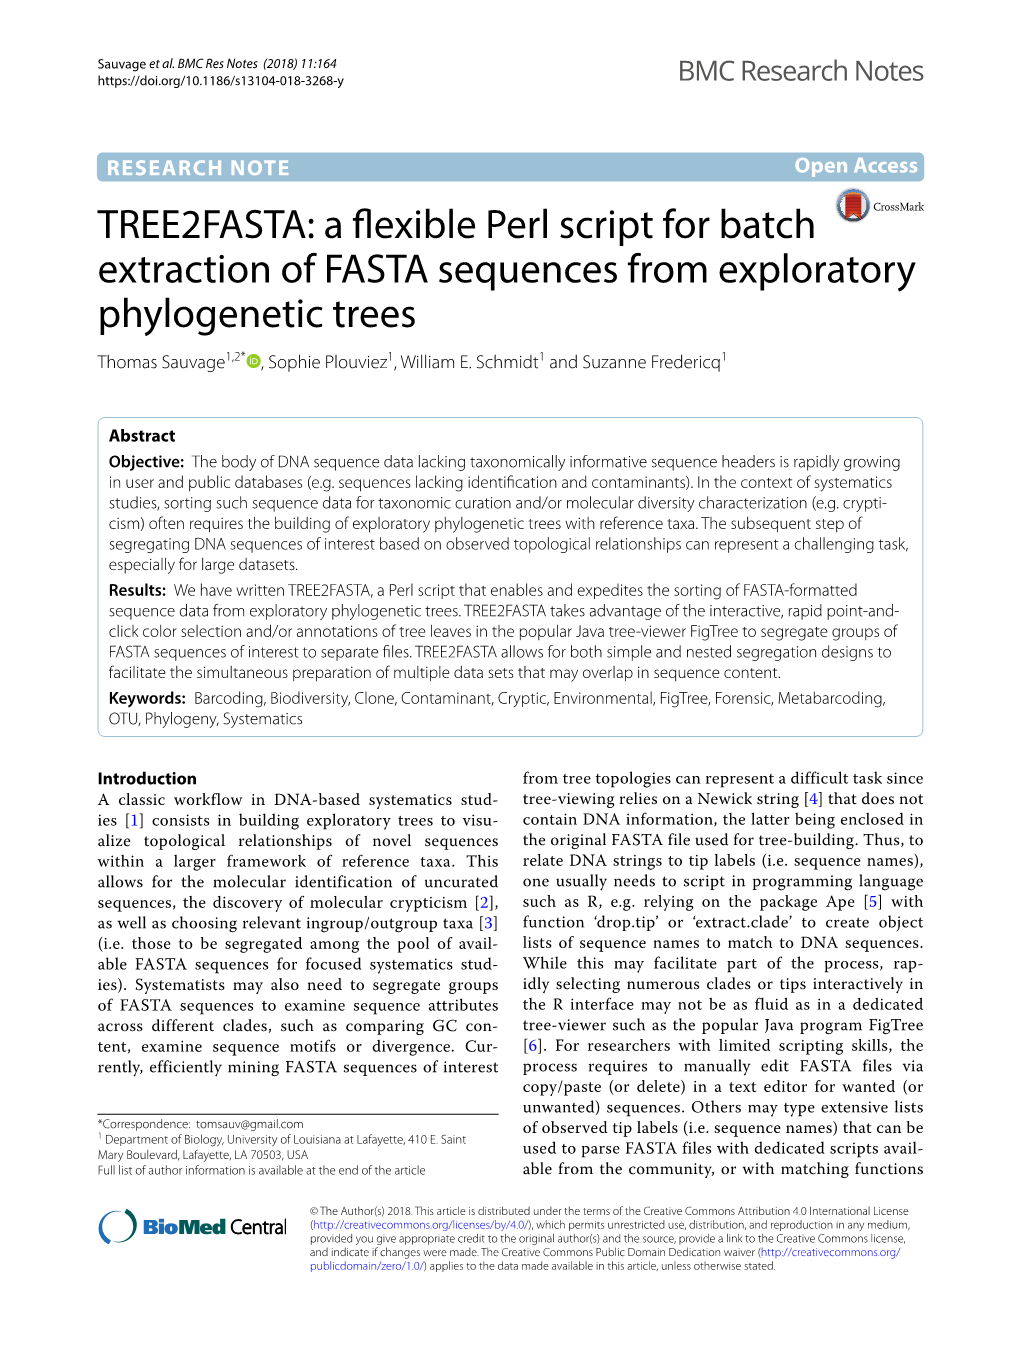 TREE2FASTA: a Flexible Perl Script for Batch Extraction of FASTA